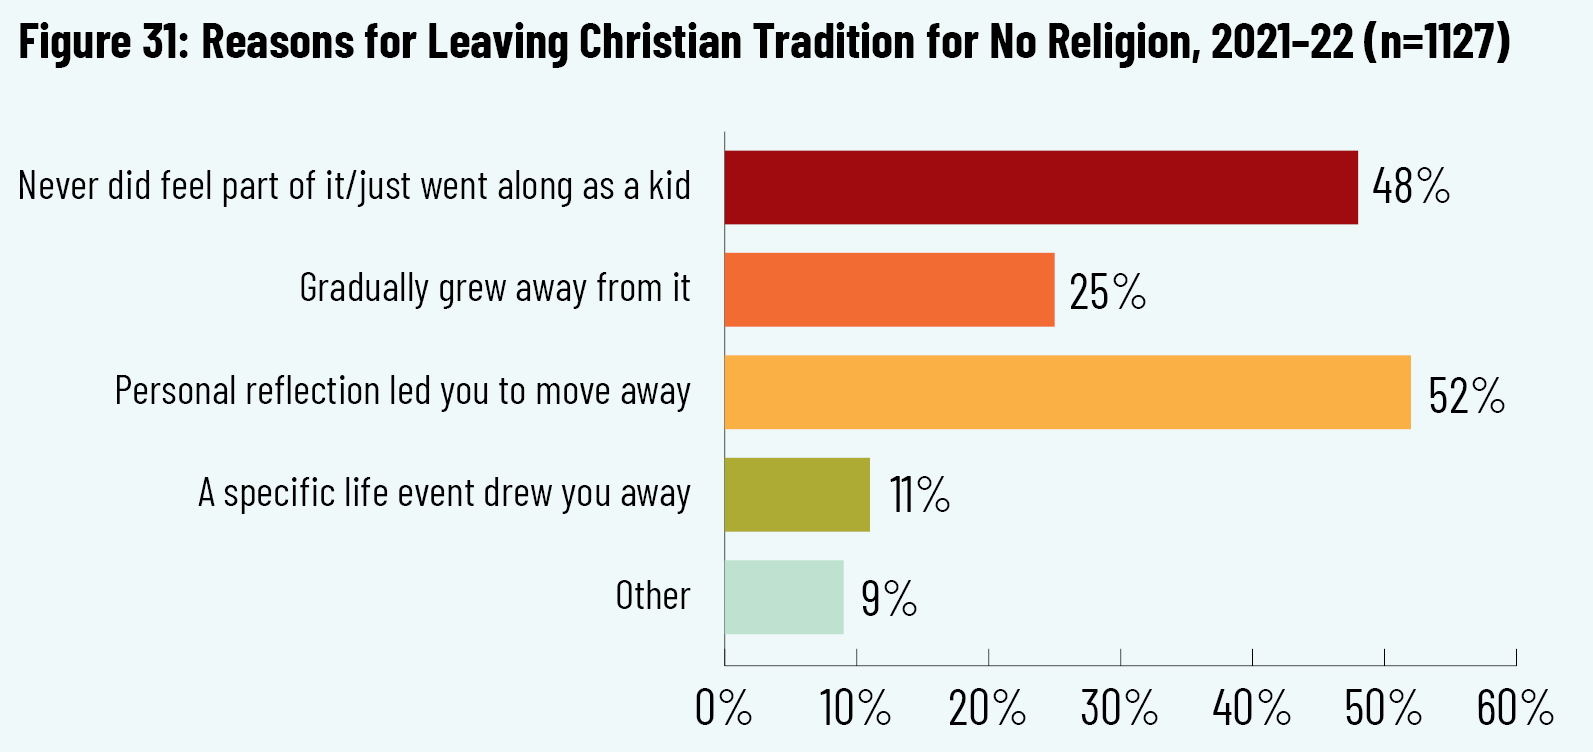 Figure 31: Reasons for Leaving Christian Tradition for No Religion, 2021–22 (n=1127)